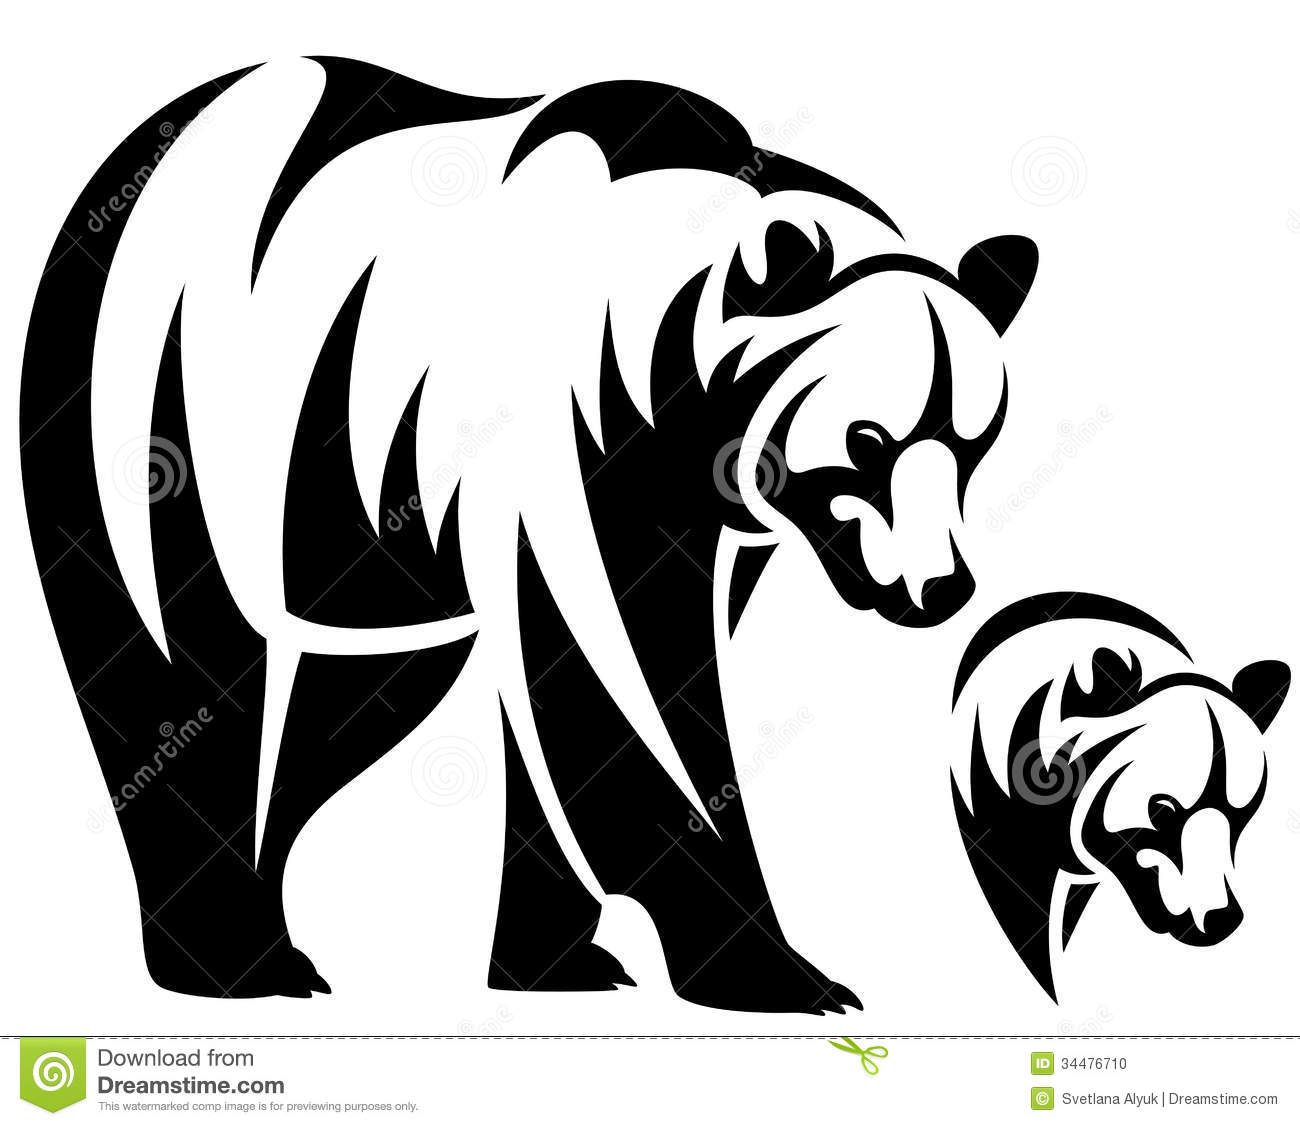 Walking Bear And Animal Head Black And White Outline Emblem